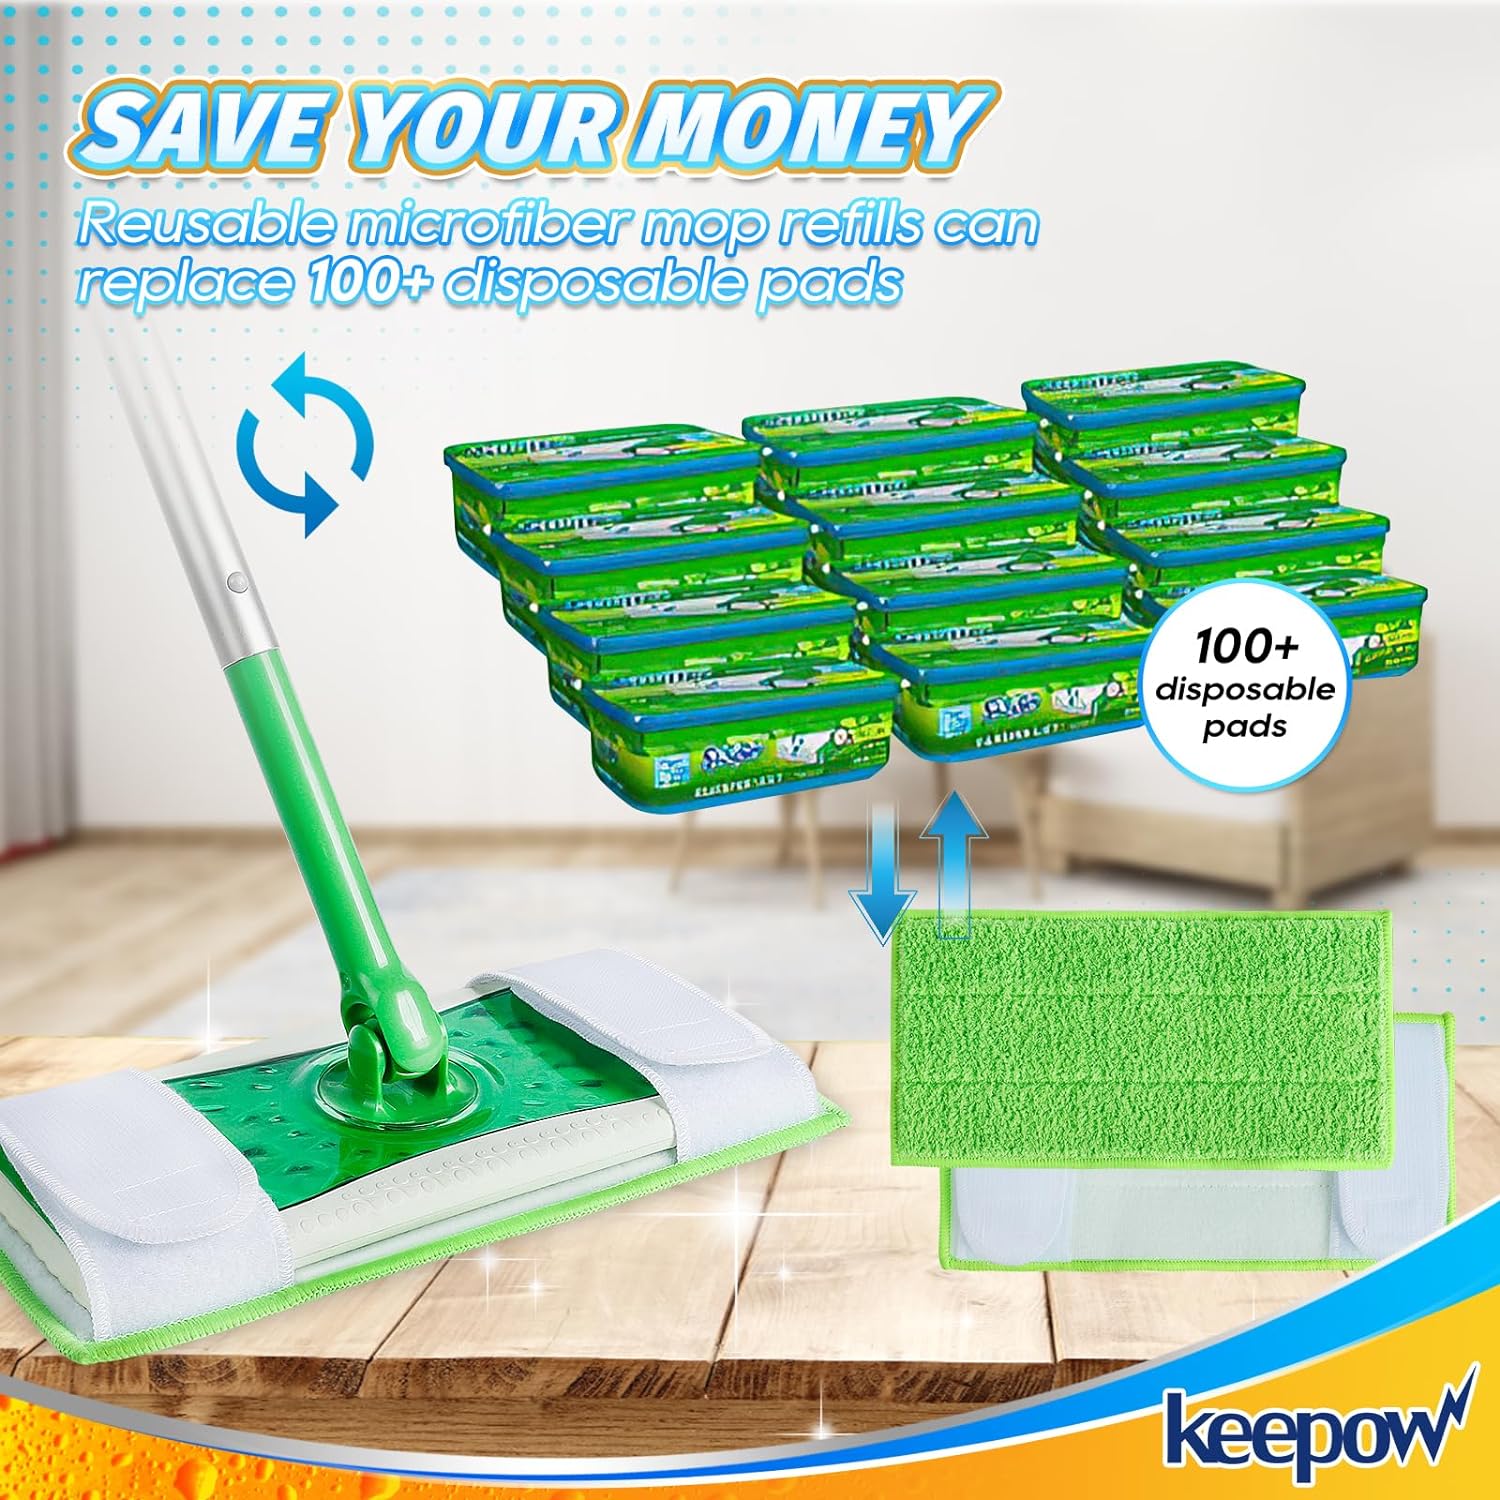 KEEPOW 5701M Dry Sweeping Cloths for Swiffer Sweeper, Reusable Microfiber Mop Pads Refills 2-Pack